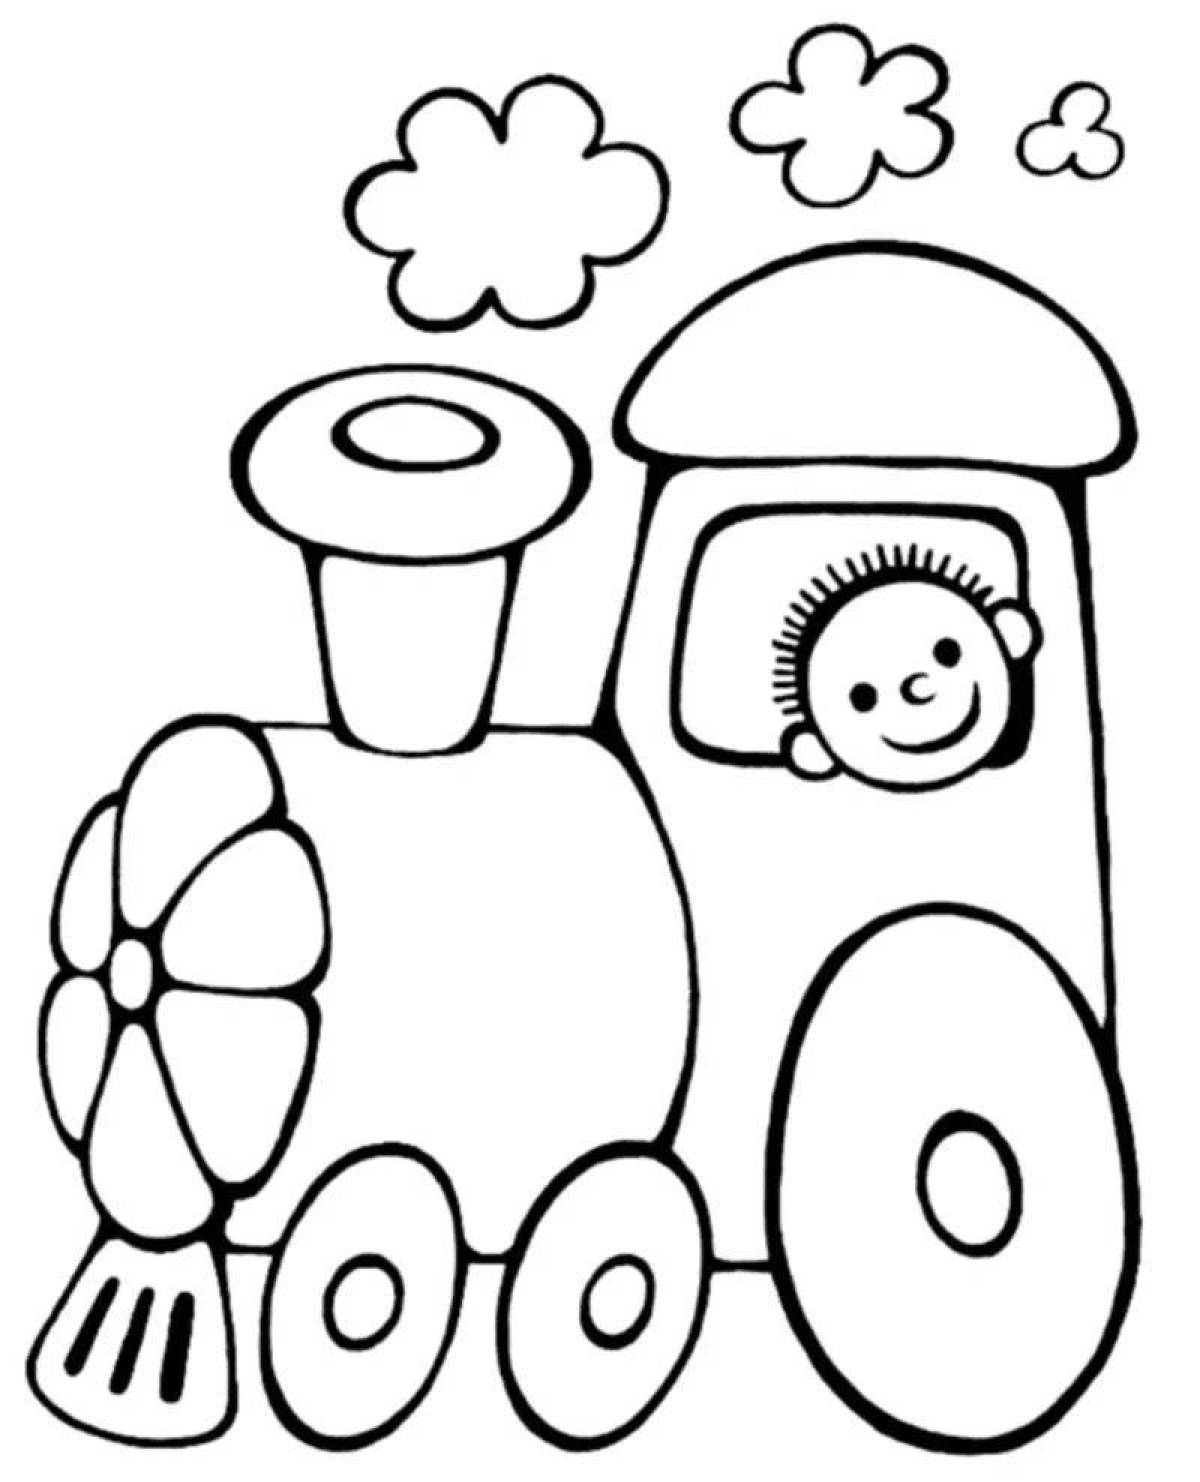 Coloring for kids 2